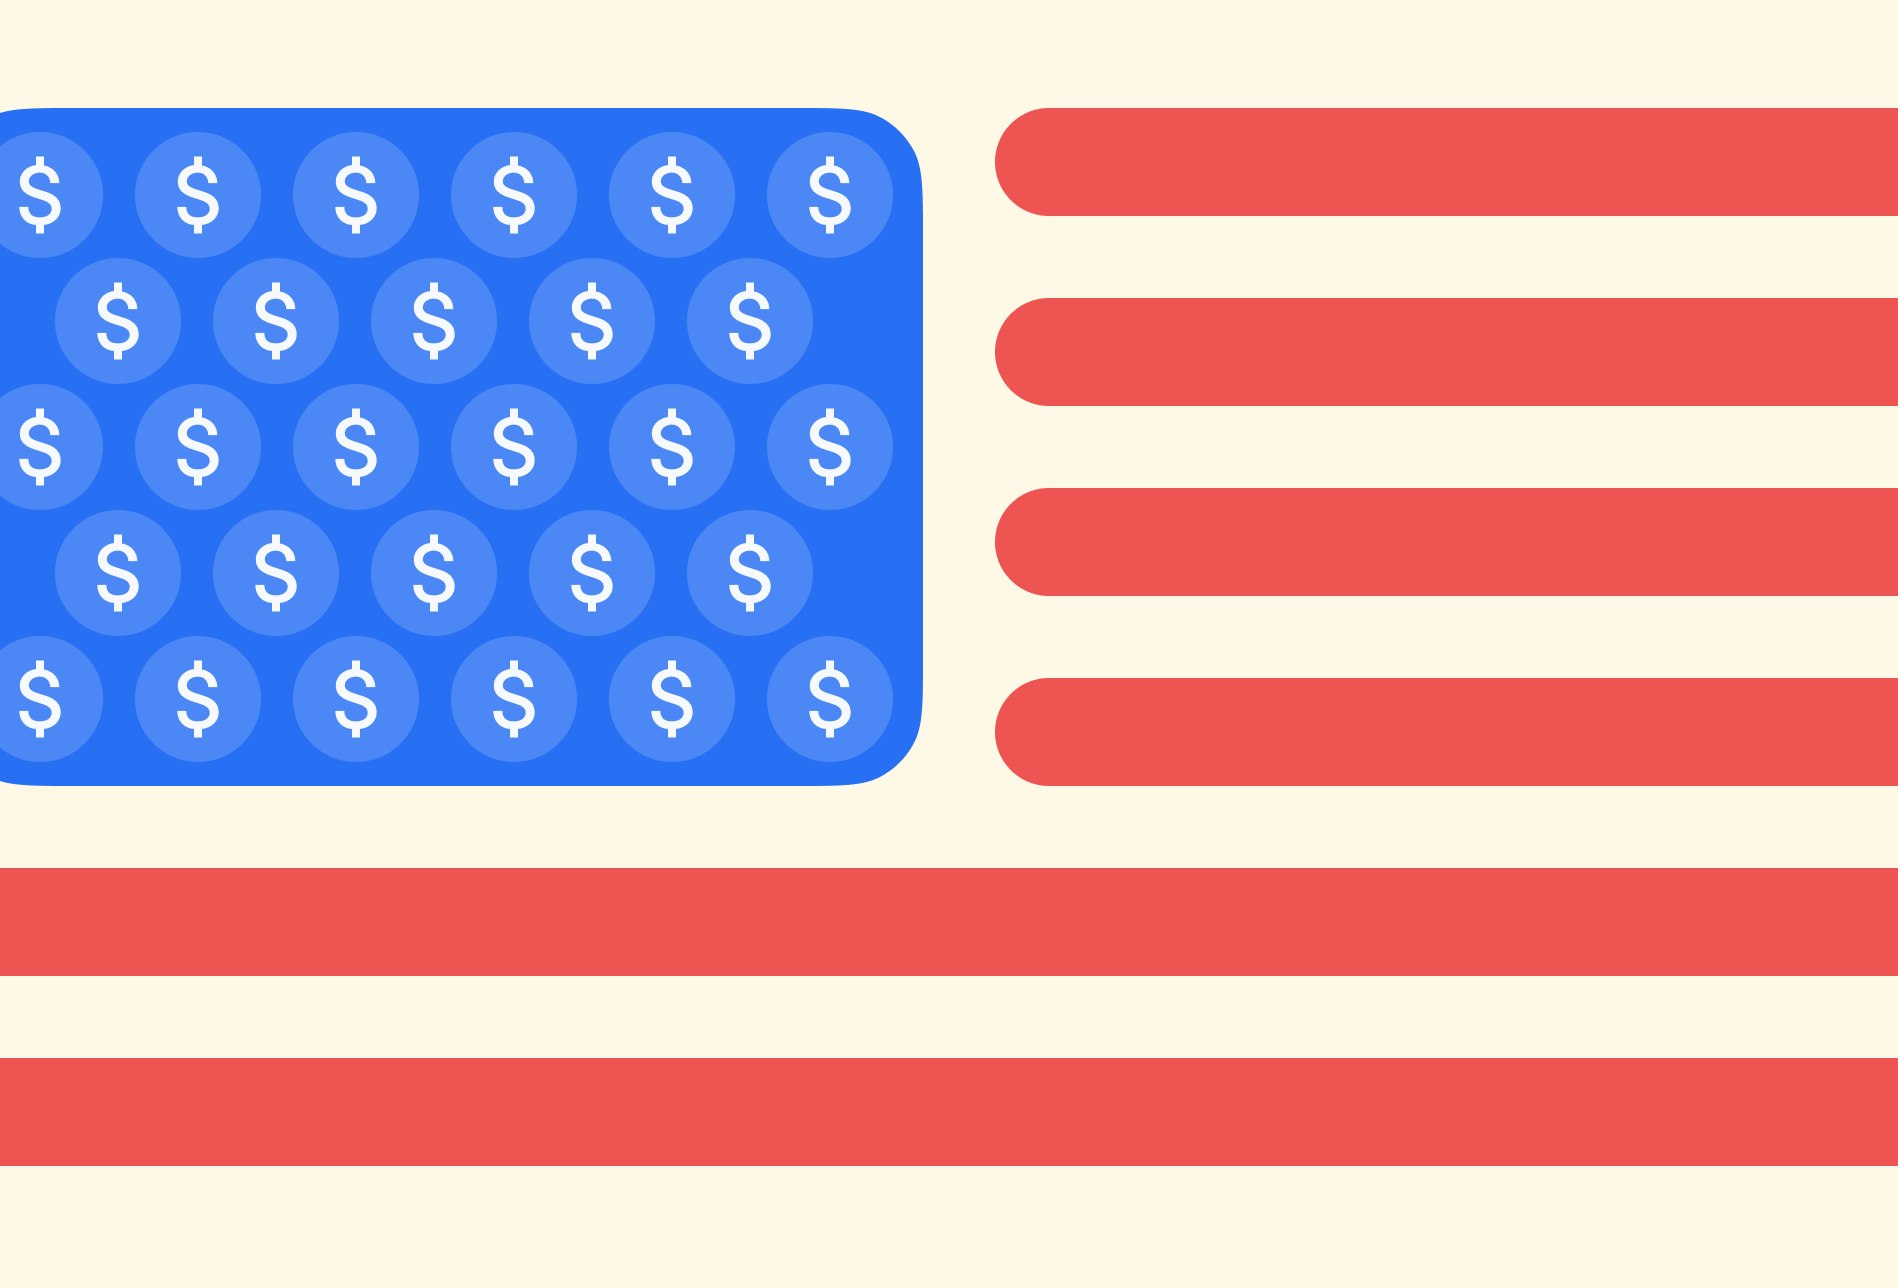 Flag of USA, with USD coins on the blue panel instead of stars